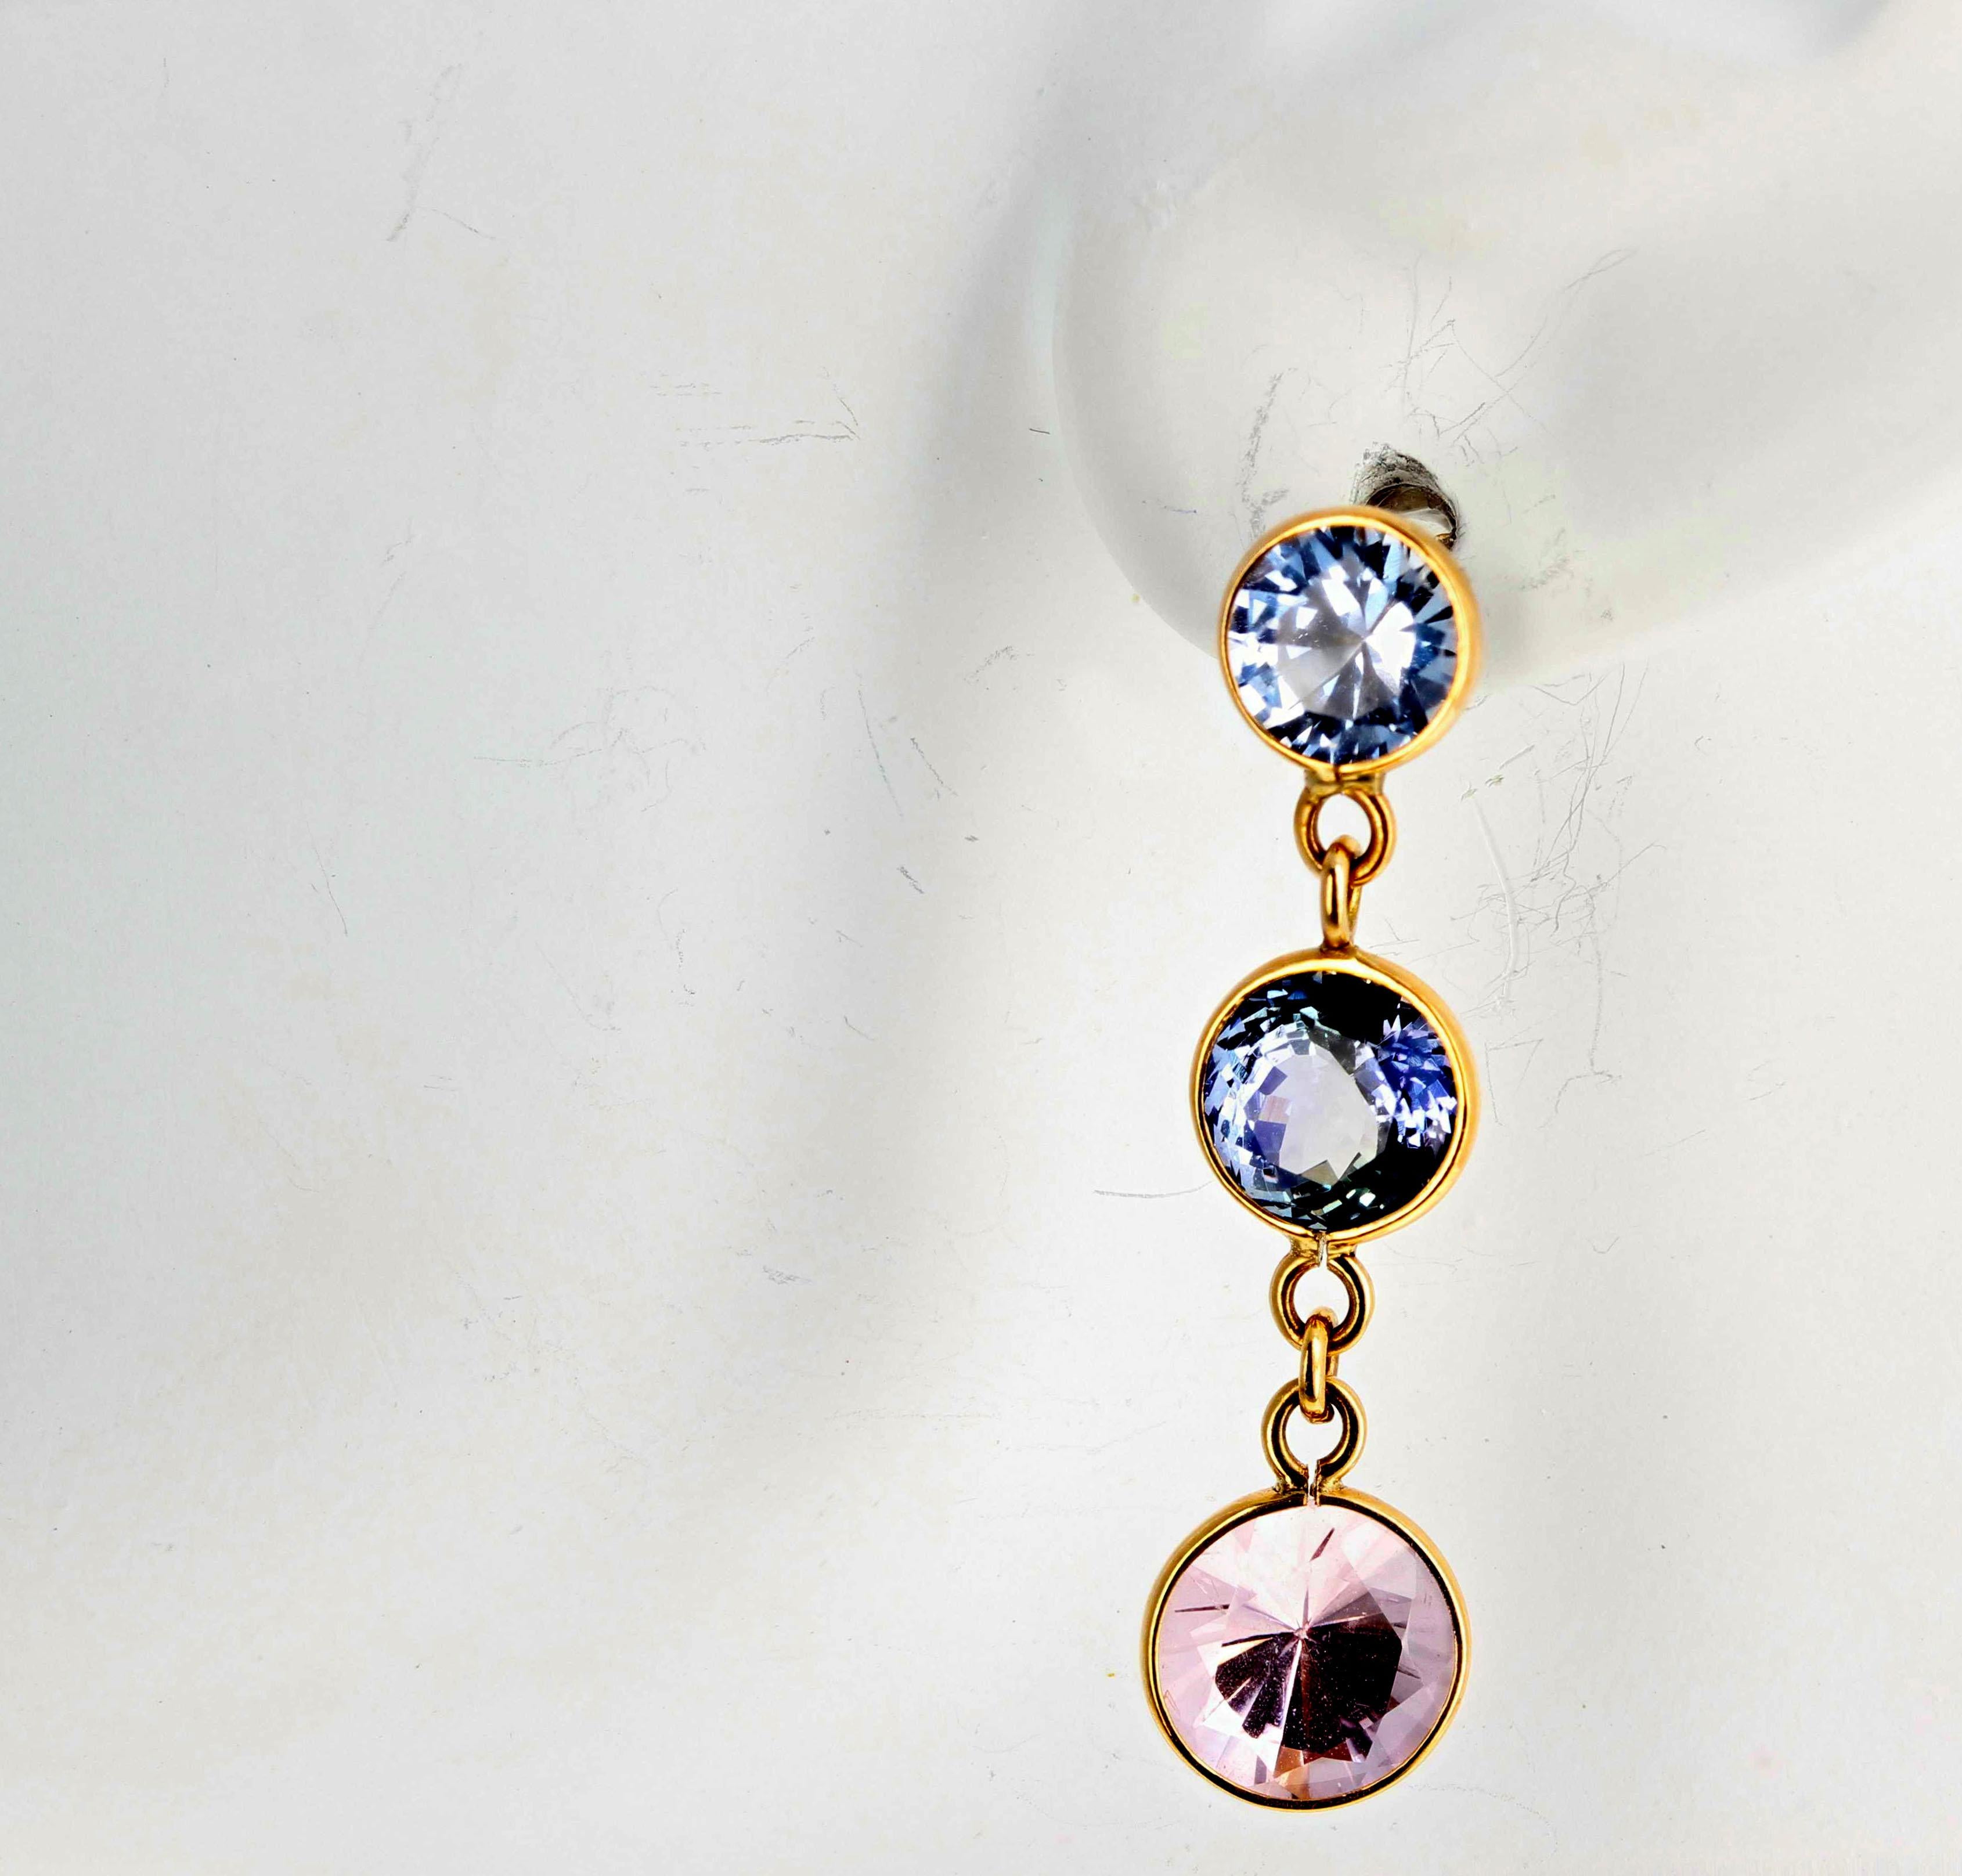 Glittering bluish white 1.70 carats of Sapphires (5 mm) top these beautiful blue Sapphires (2.84 carats - 6 mm)) and sparkling pink Morganites (2.88 carats- 7 mm)) set in handmade unique 18Kt yellow gold swinging stud earrings.  They glamorously